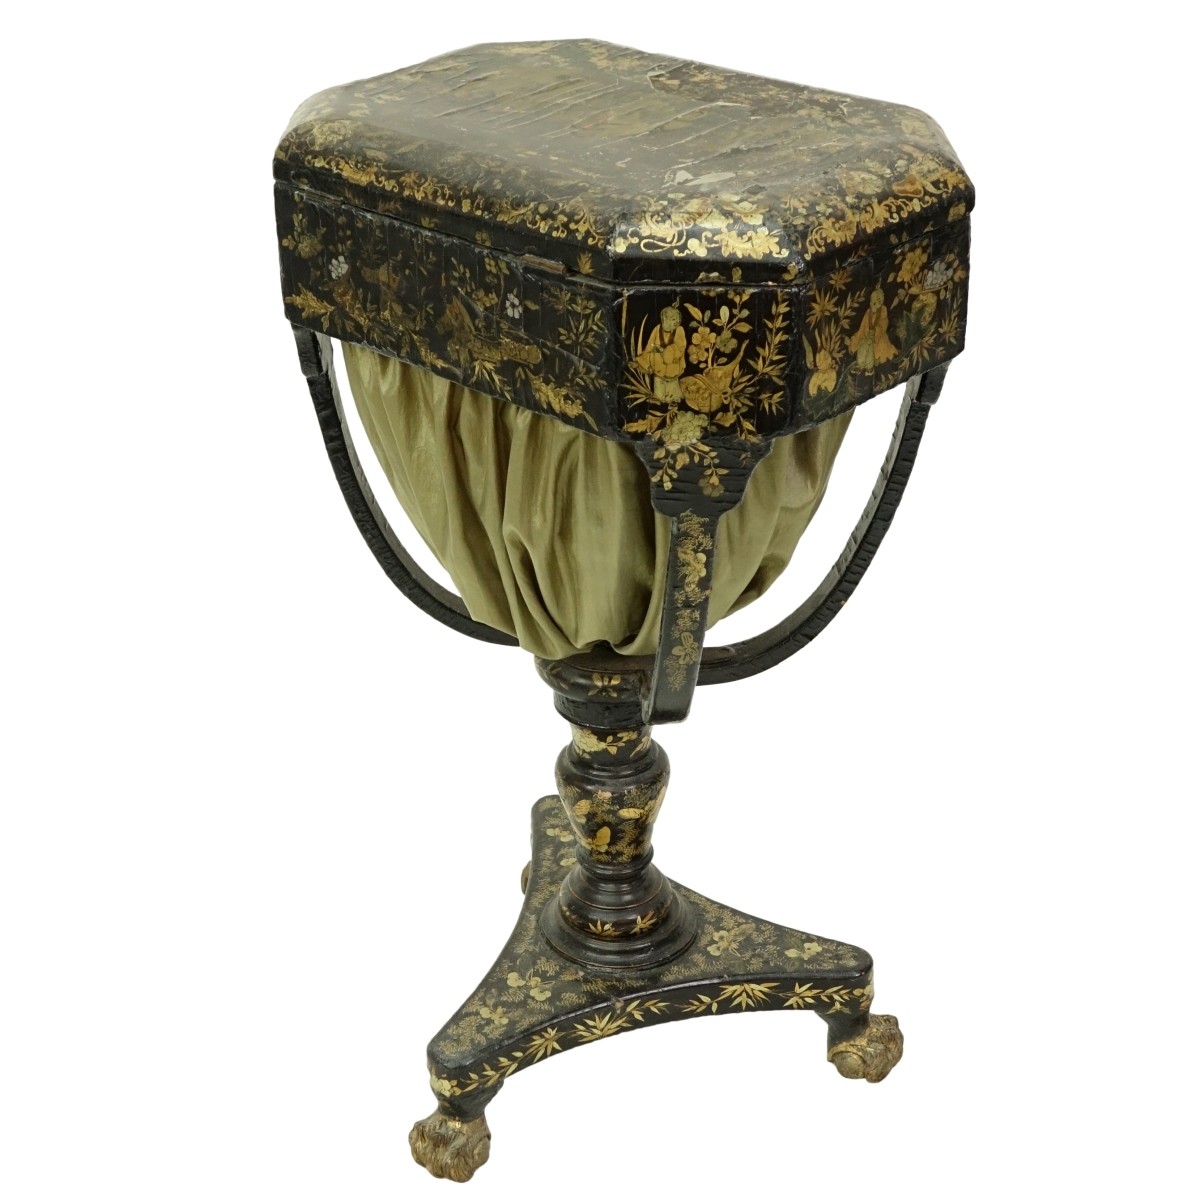 19th C English Regency Chinoiserie Sewing Stand